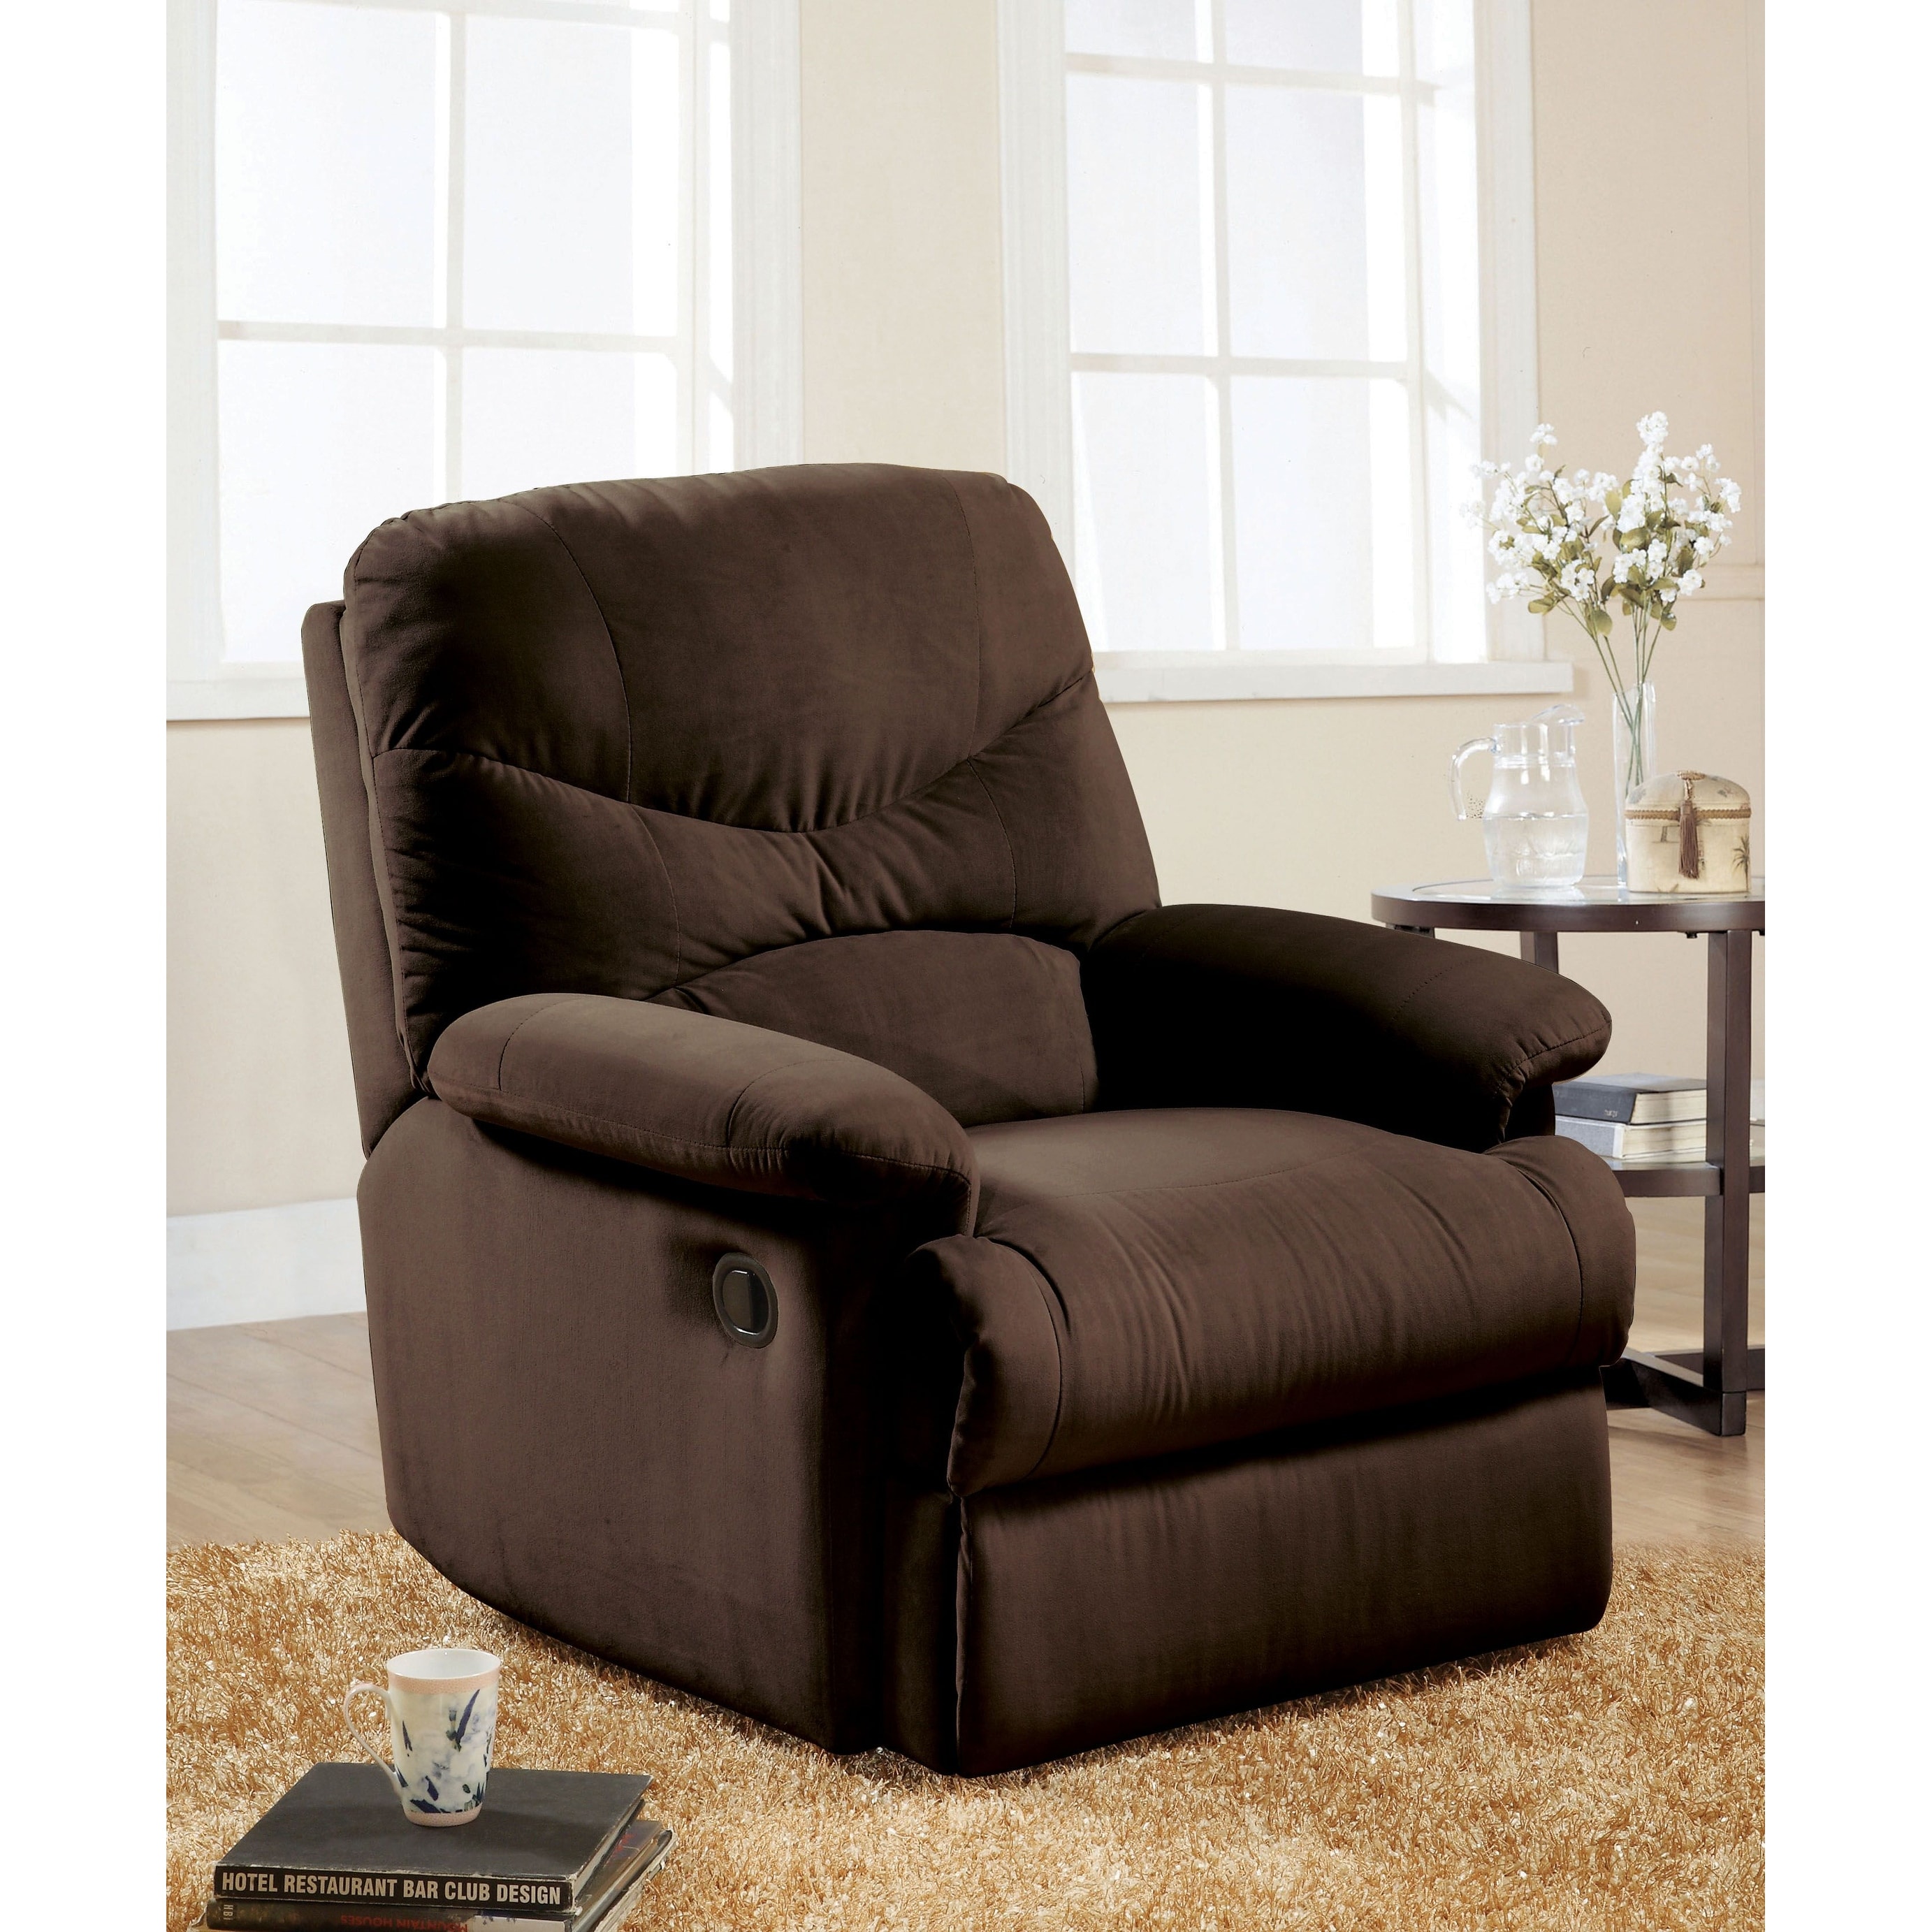 https://ak1.ostkcdn.com/images/products/is/images/direct/15b63660b7fe6a323ef3af4b92fb661b903b149d/Adjustable-Recliner-Chair-with-Hardwood-Frame-%26-Footrest-Extension%2C-Cushioned-Single-Sofa-for-Livingroom.jpg